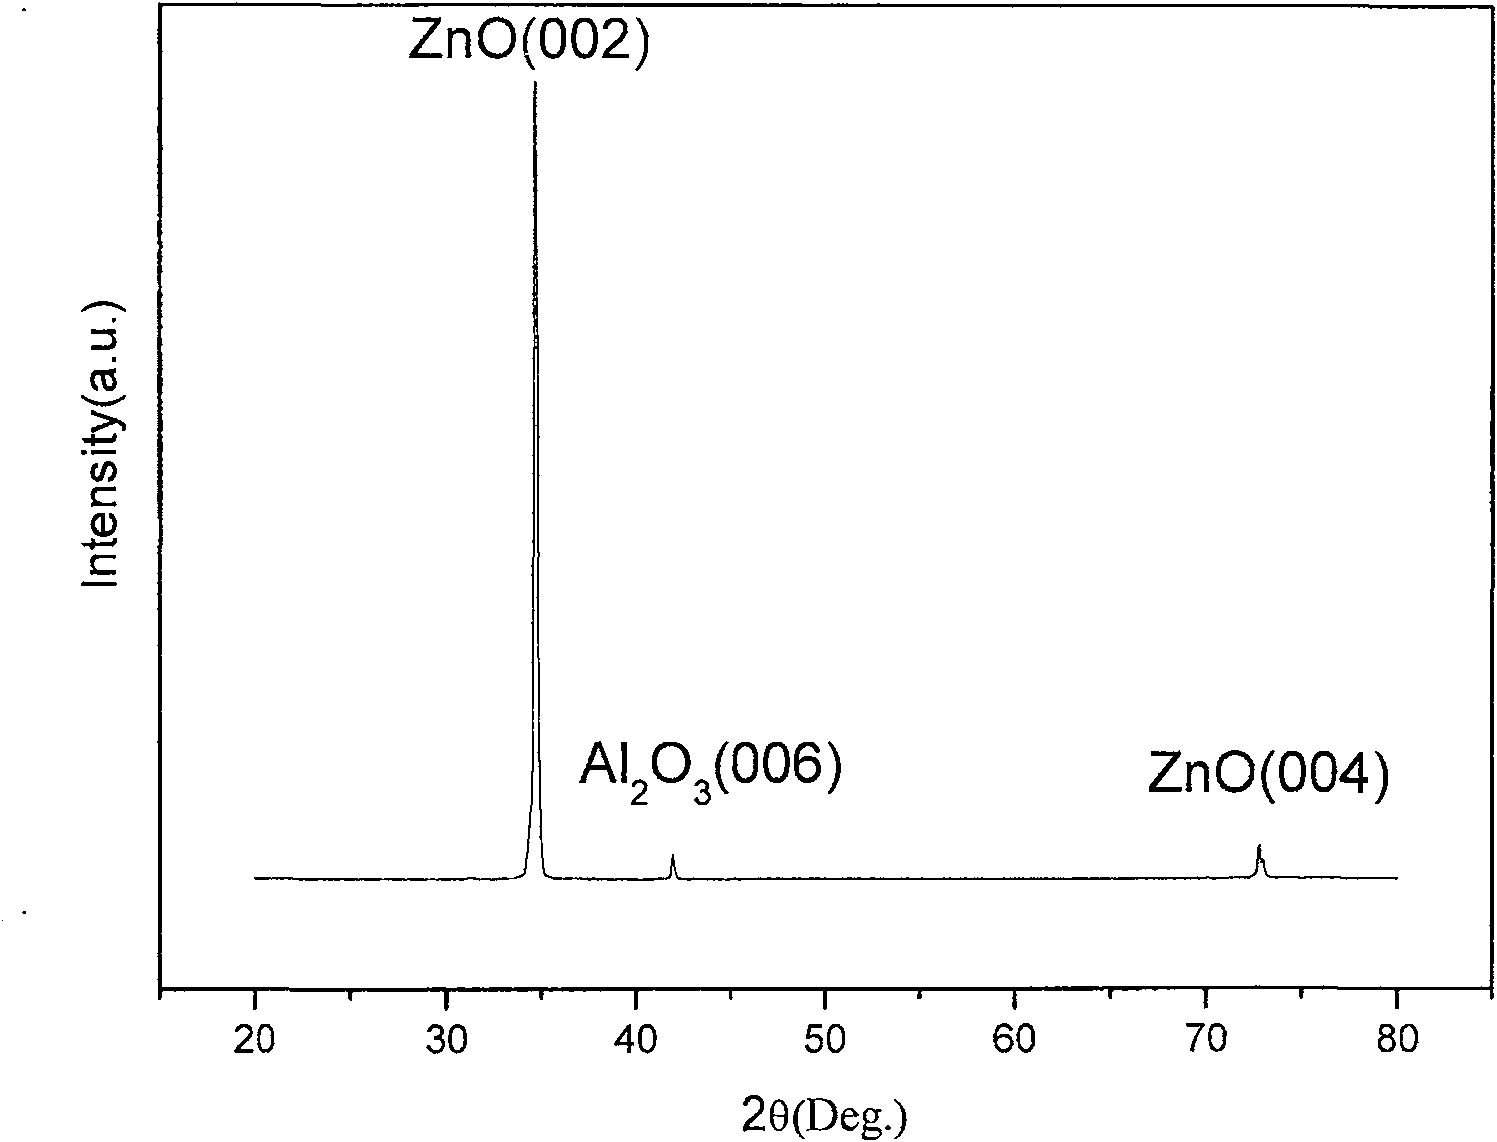 Acceptor activation method for nitrogen adulterated ZnO